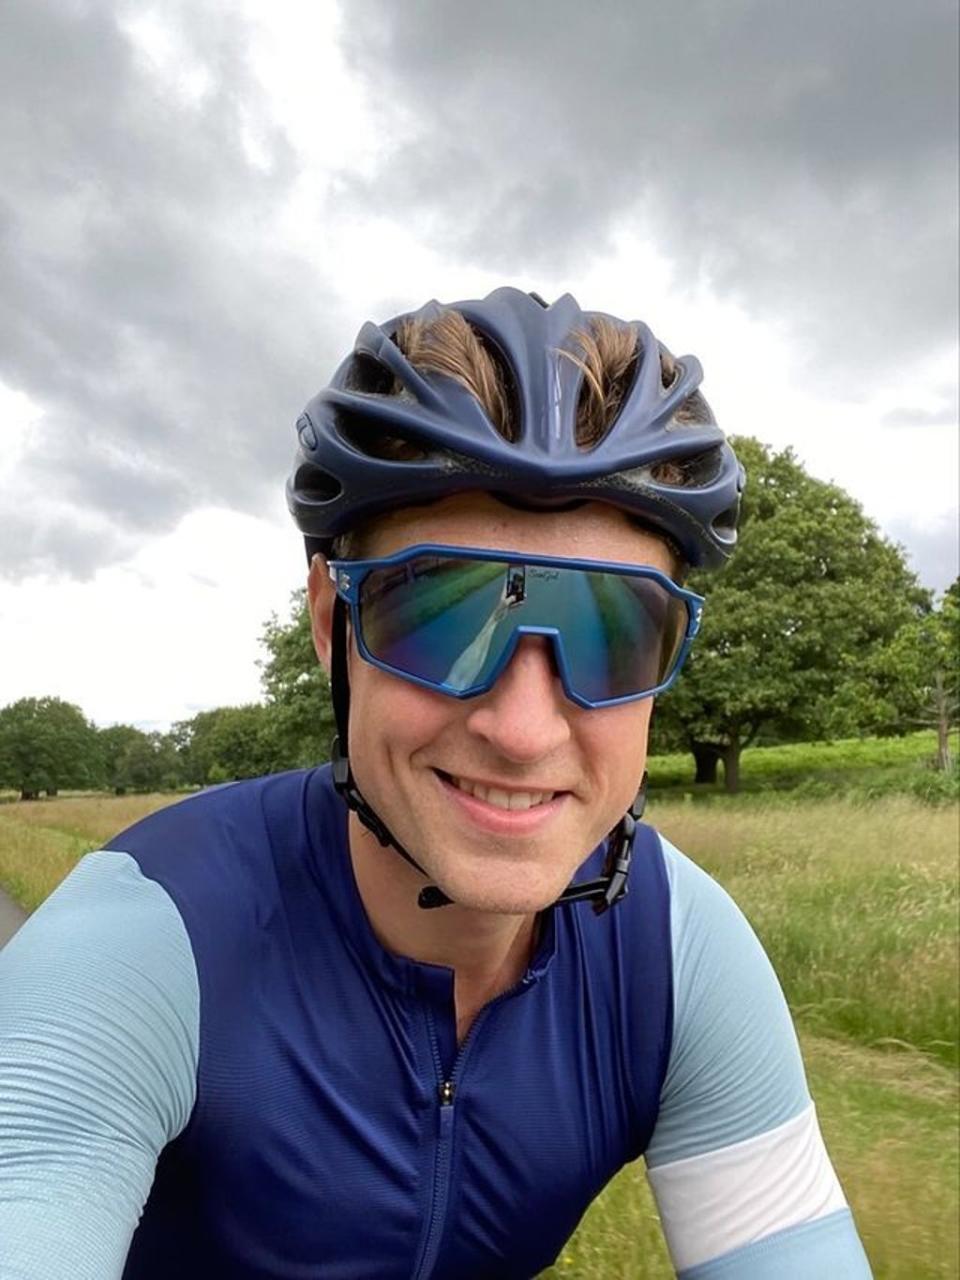 Lawyer Harry Speak, 28, has been riding in the park for more than a decade (Harry Speak)